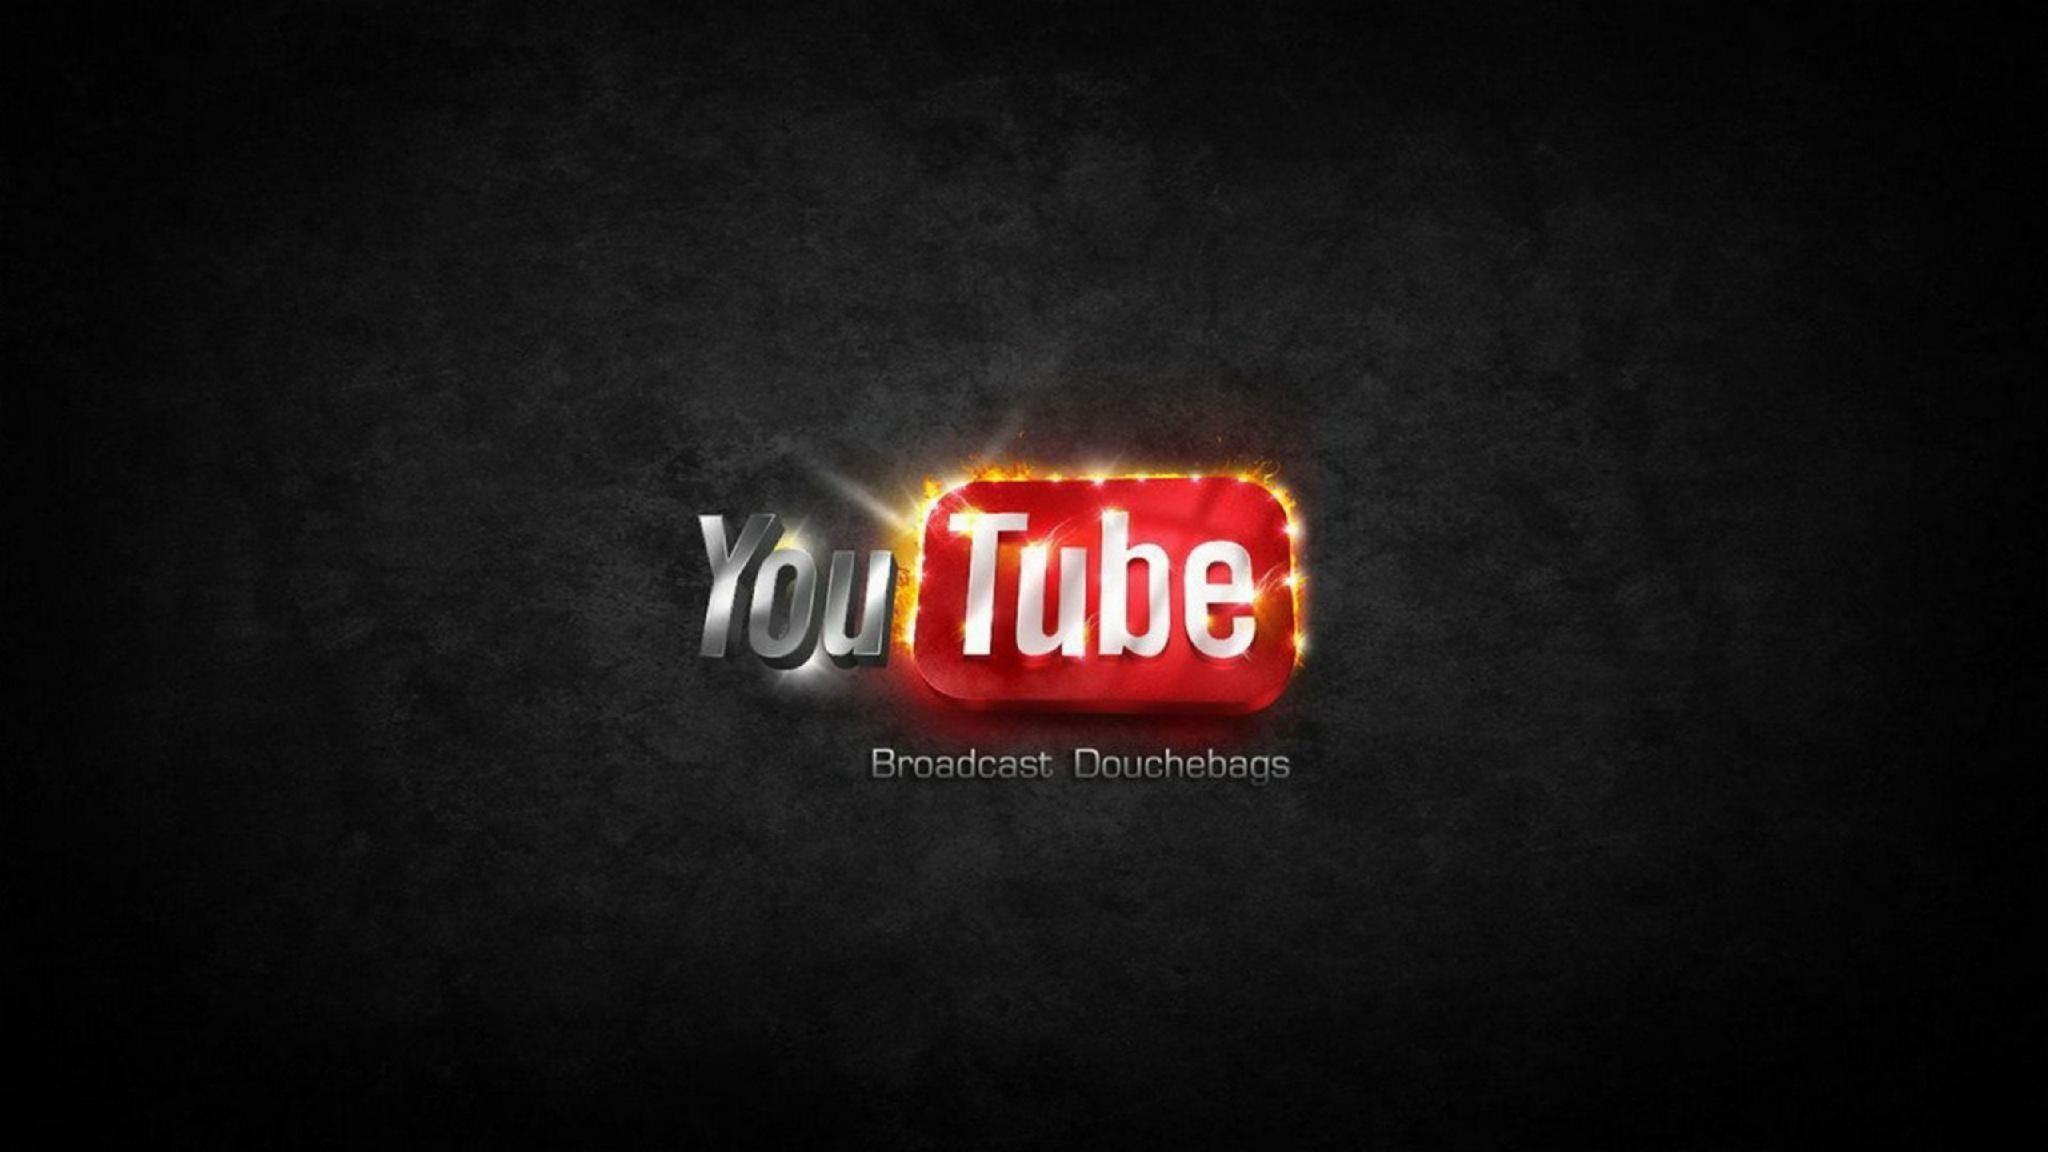 Youtube Logo Wallpapers Top Free Youtube Logo Backgrounds Wallpaperaccess